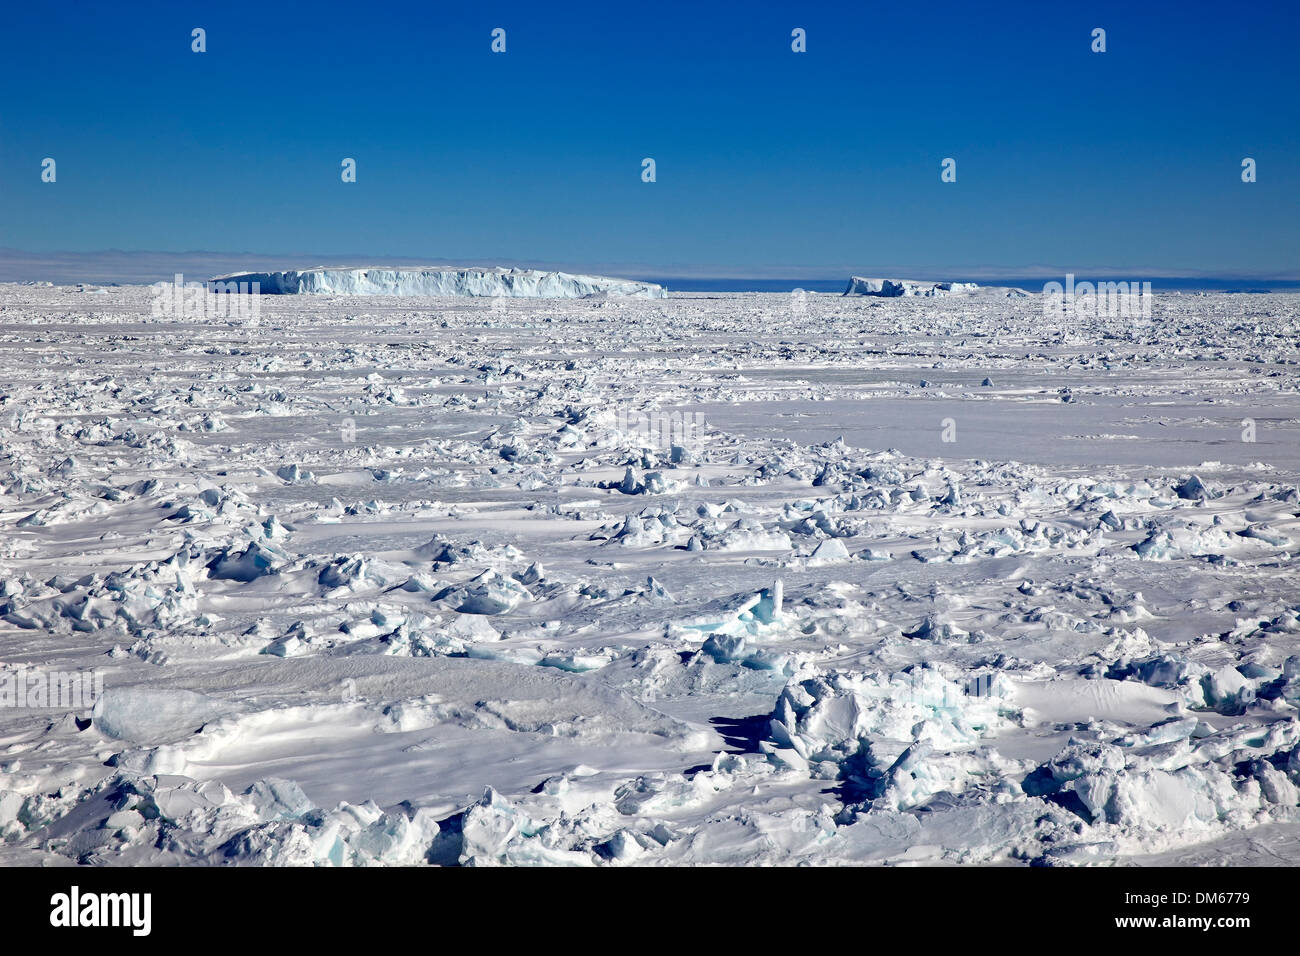 Icy landscape, pack ice, Weddell Sea, Antarctica Stock Photo